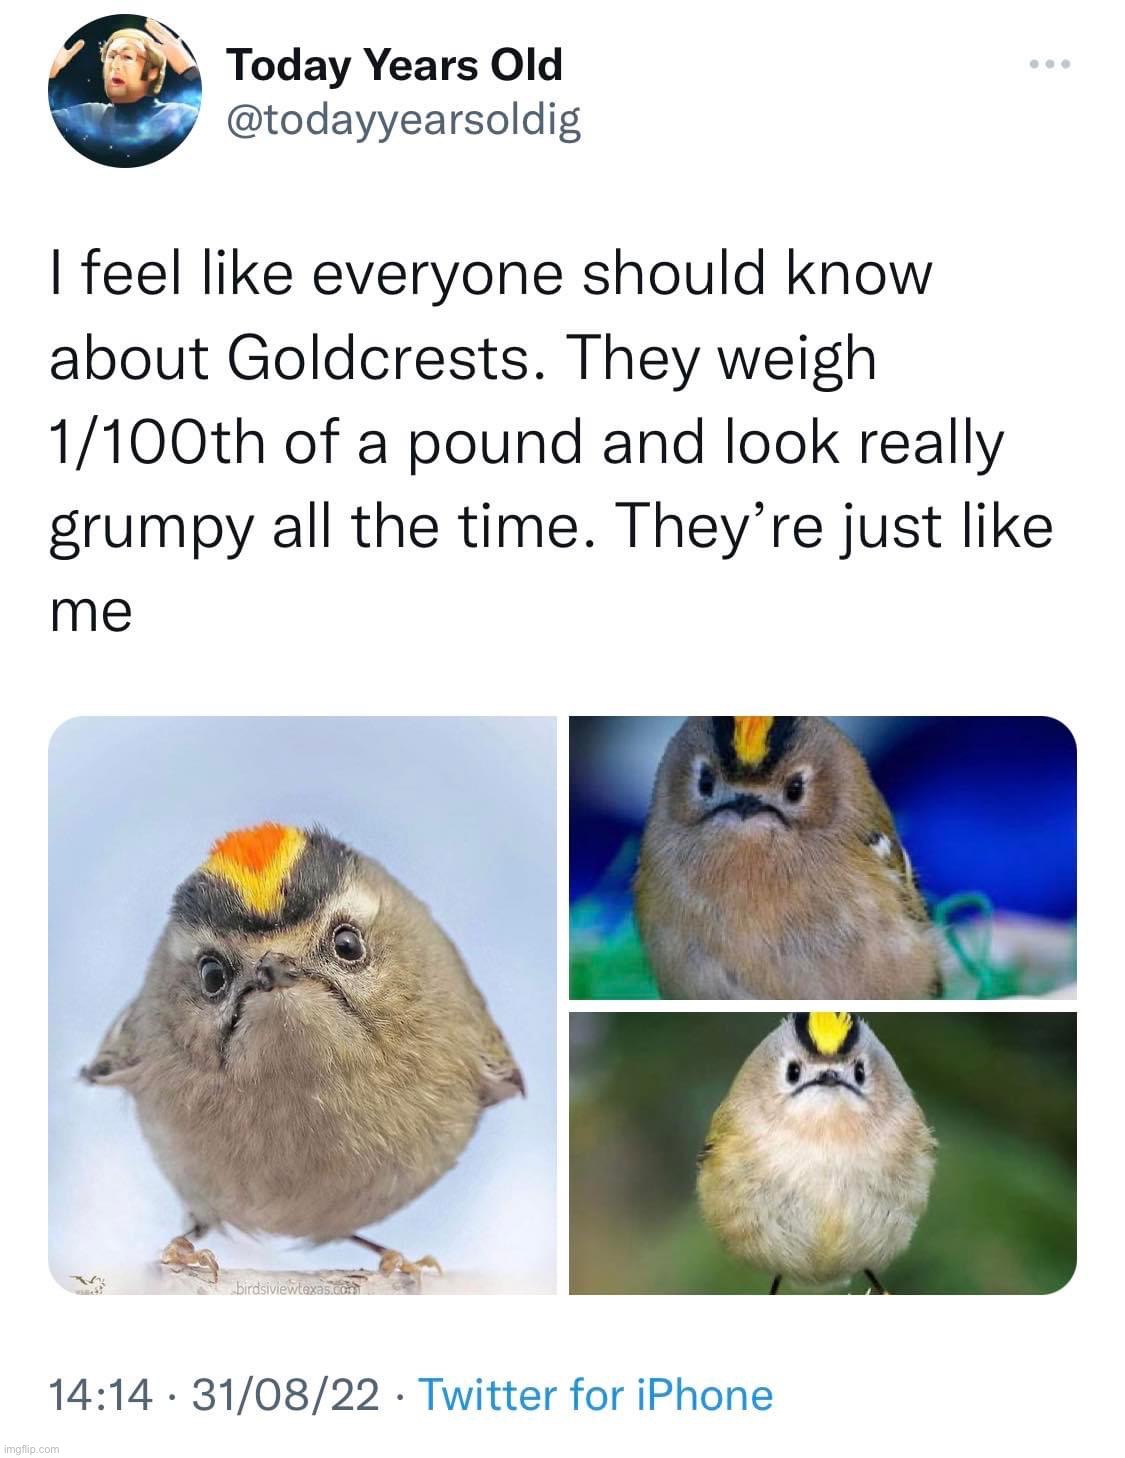 Goldcrests look like me | image tagged in goldcrests look like me | made w/ Imgflip meme maker